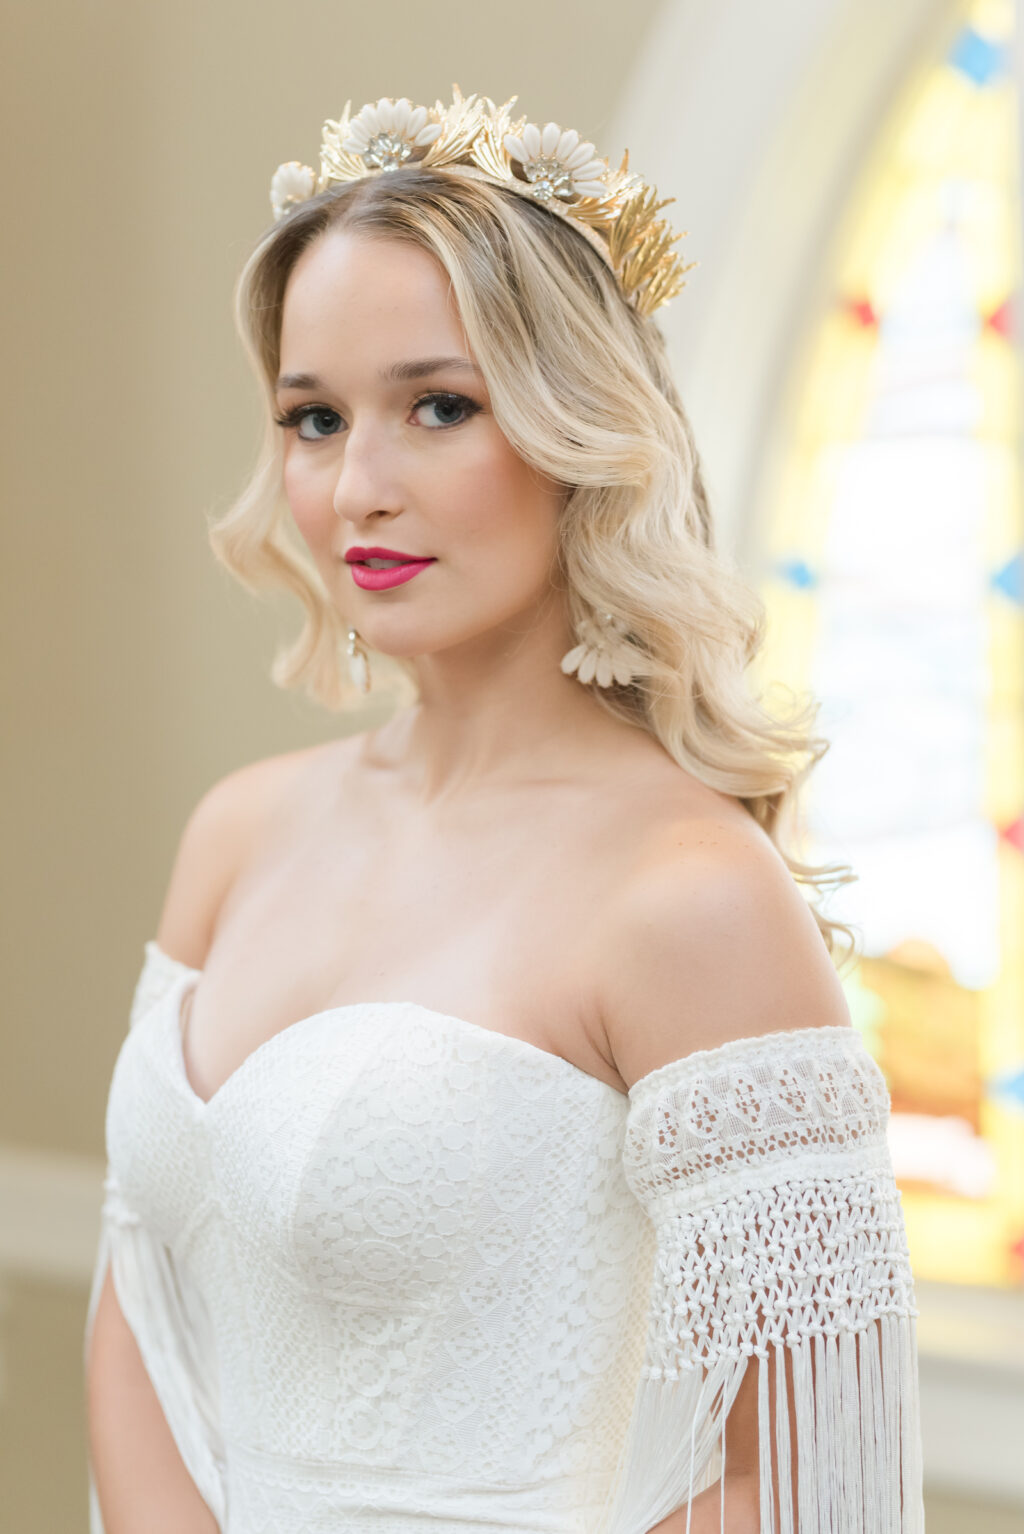 Florida Bride Wearing Strapless Vintage Wedding Dress with Fringe Off the Shoulder Sleeves, Gold and Ivory Floral Crown | Adore Bridal Hair and Makeup